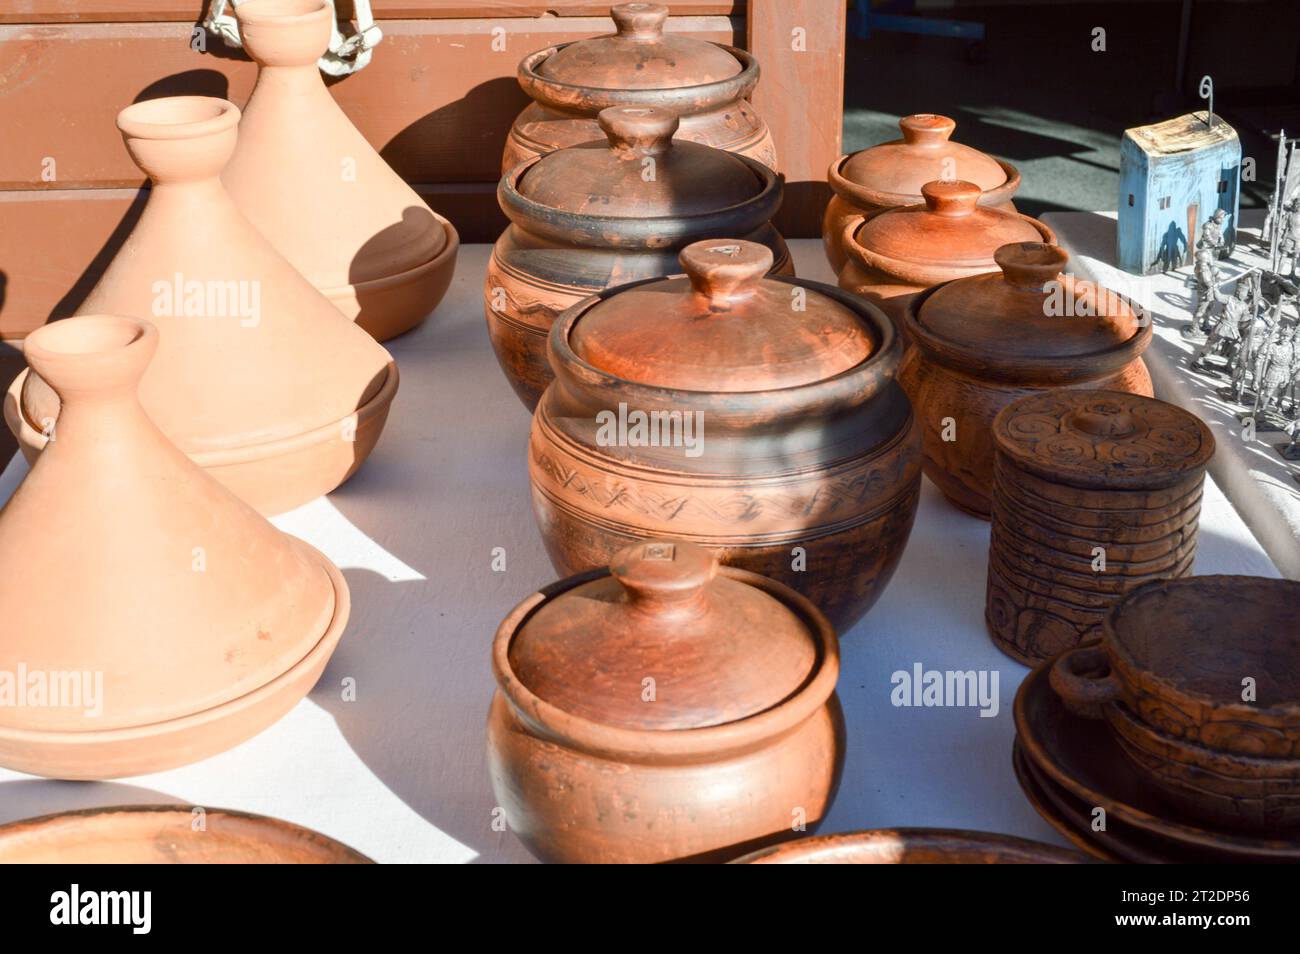 Natural traditional clay pottery beautiful old kitchen appliances, dishes, jugs, vases, pots, mugs. The background. Stock Photo